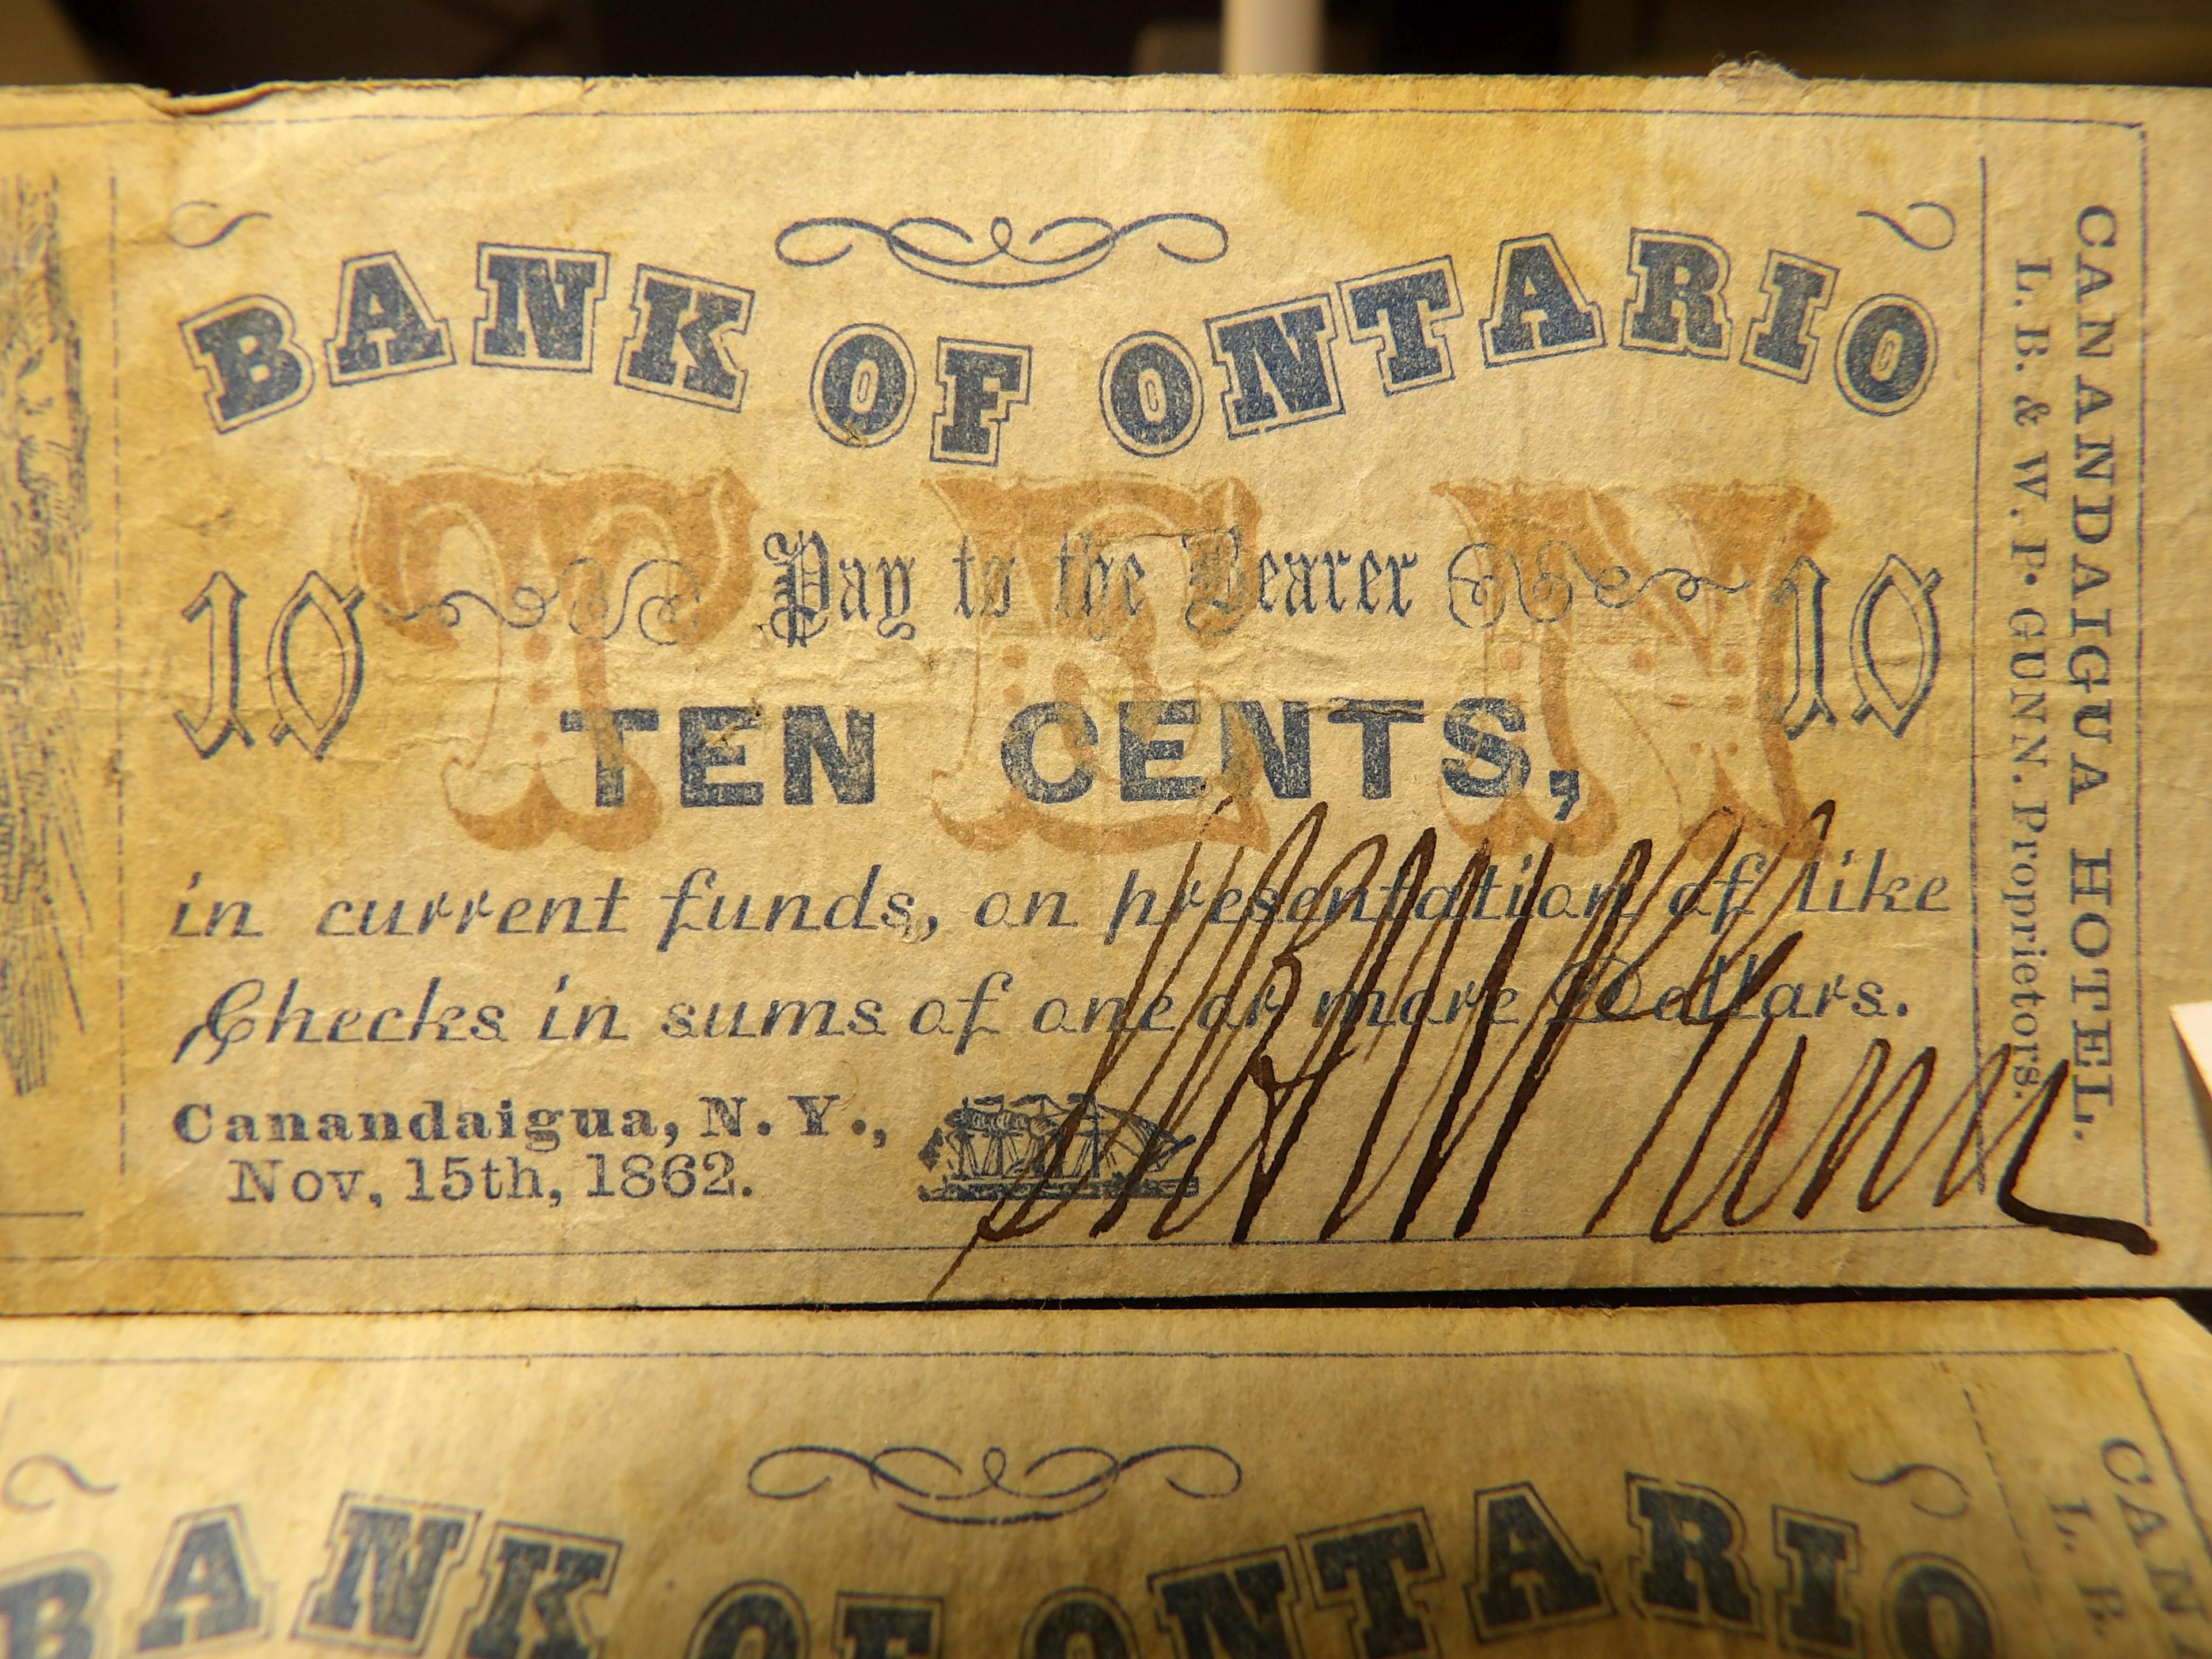 Set of Four Nov. 15th, 1864 Civil War Era Banknotes from Canandaigua, N.Y. Bank of Ontario, Five, Te